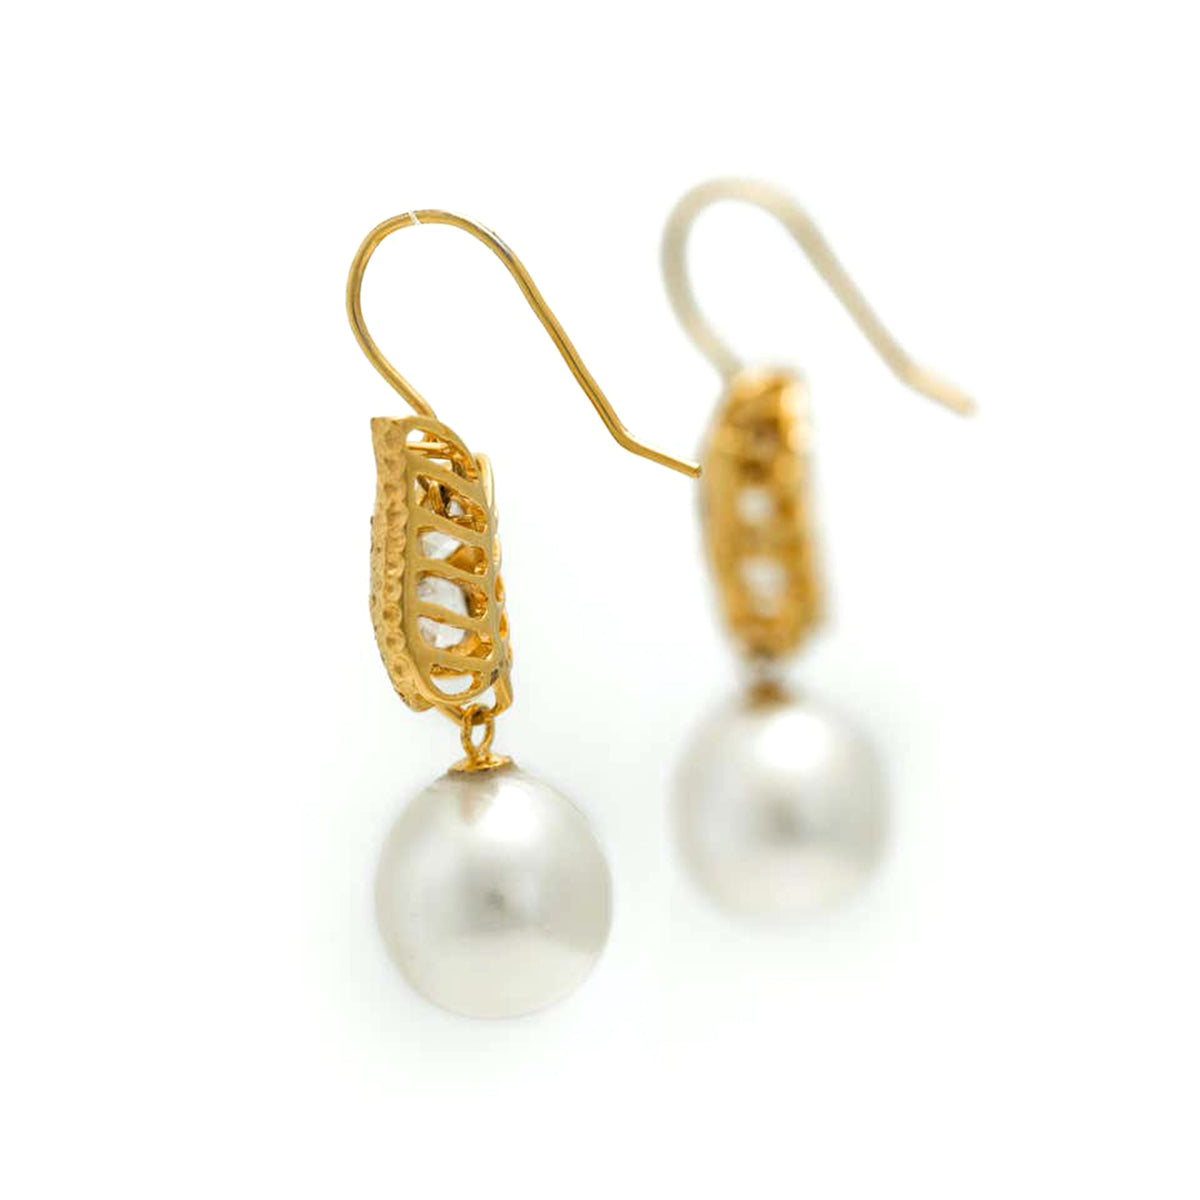 South Sea Pearl and Rose Cut Diamond Earrings in 18 Karat Yellow Gold hooks view